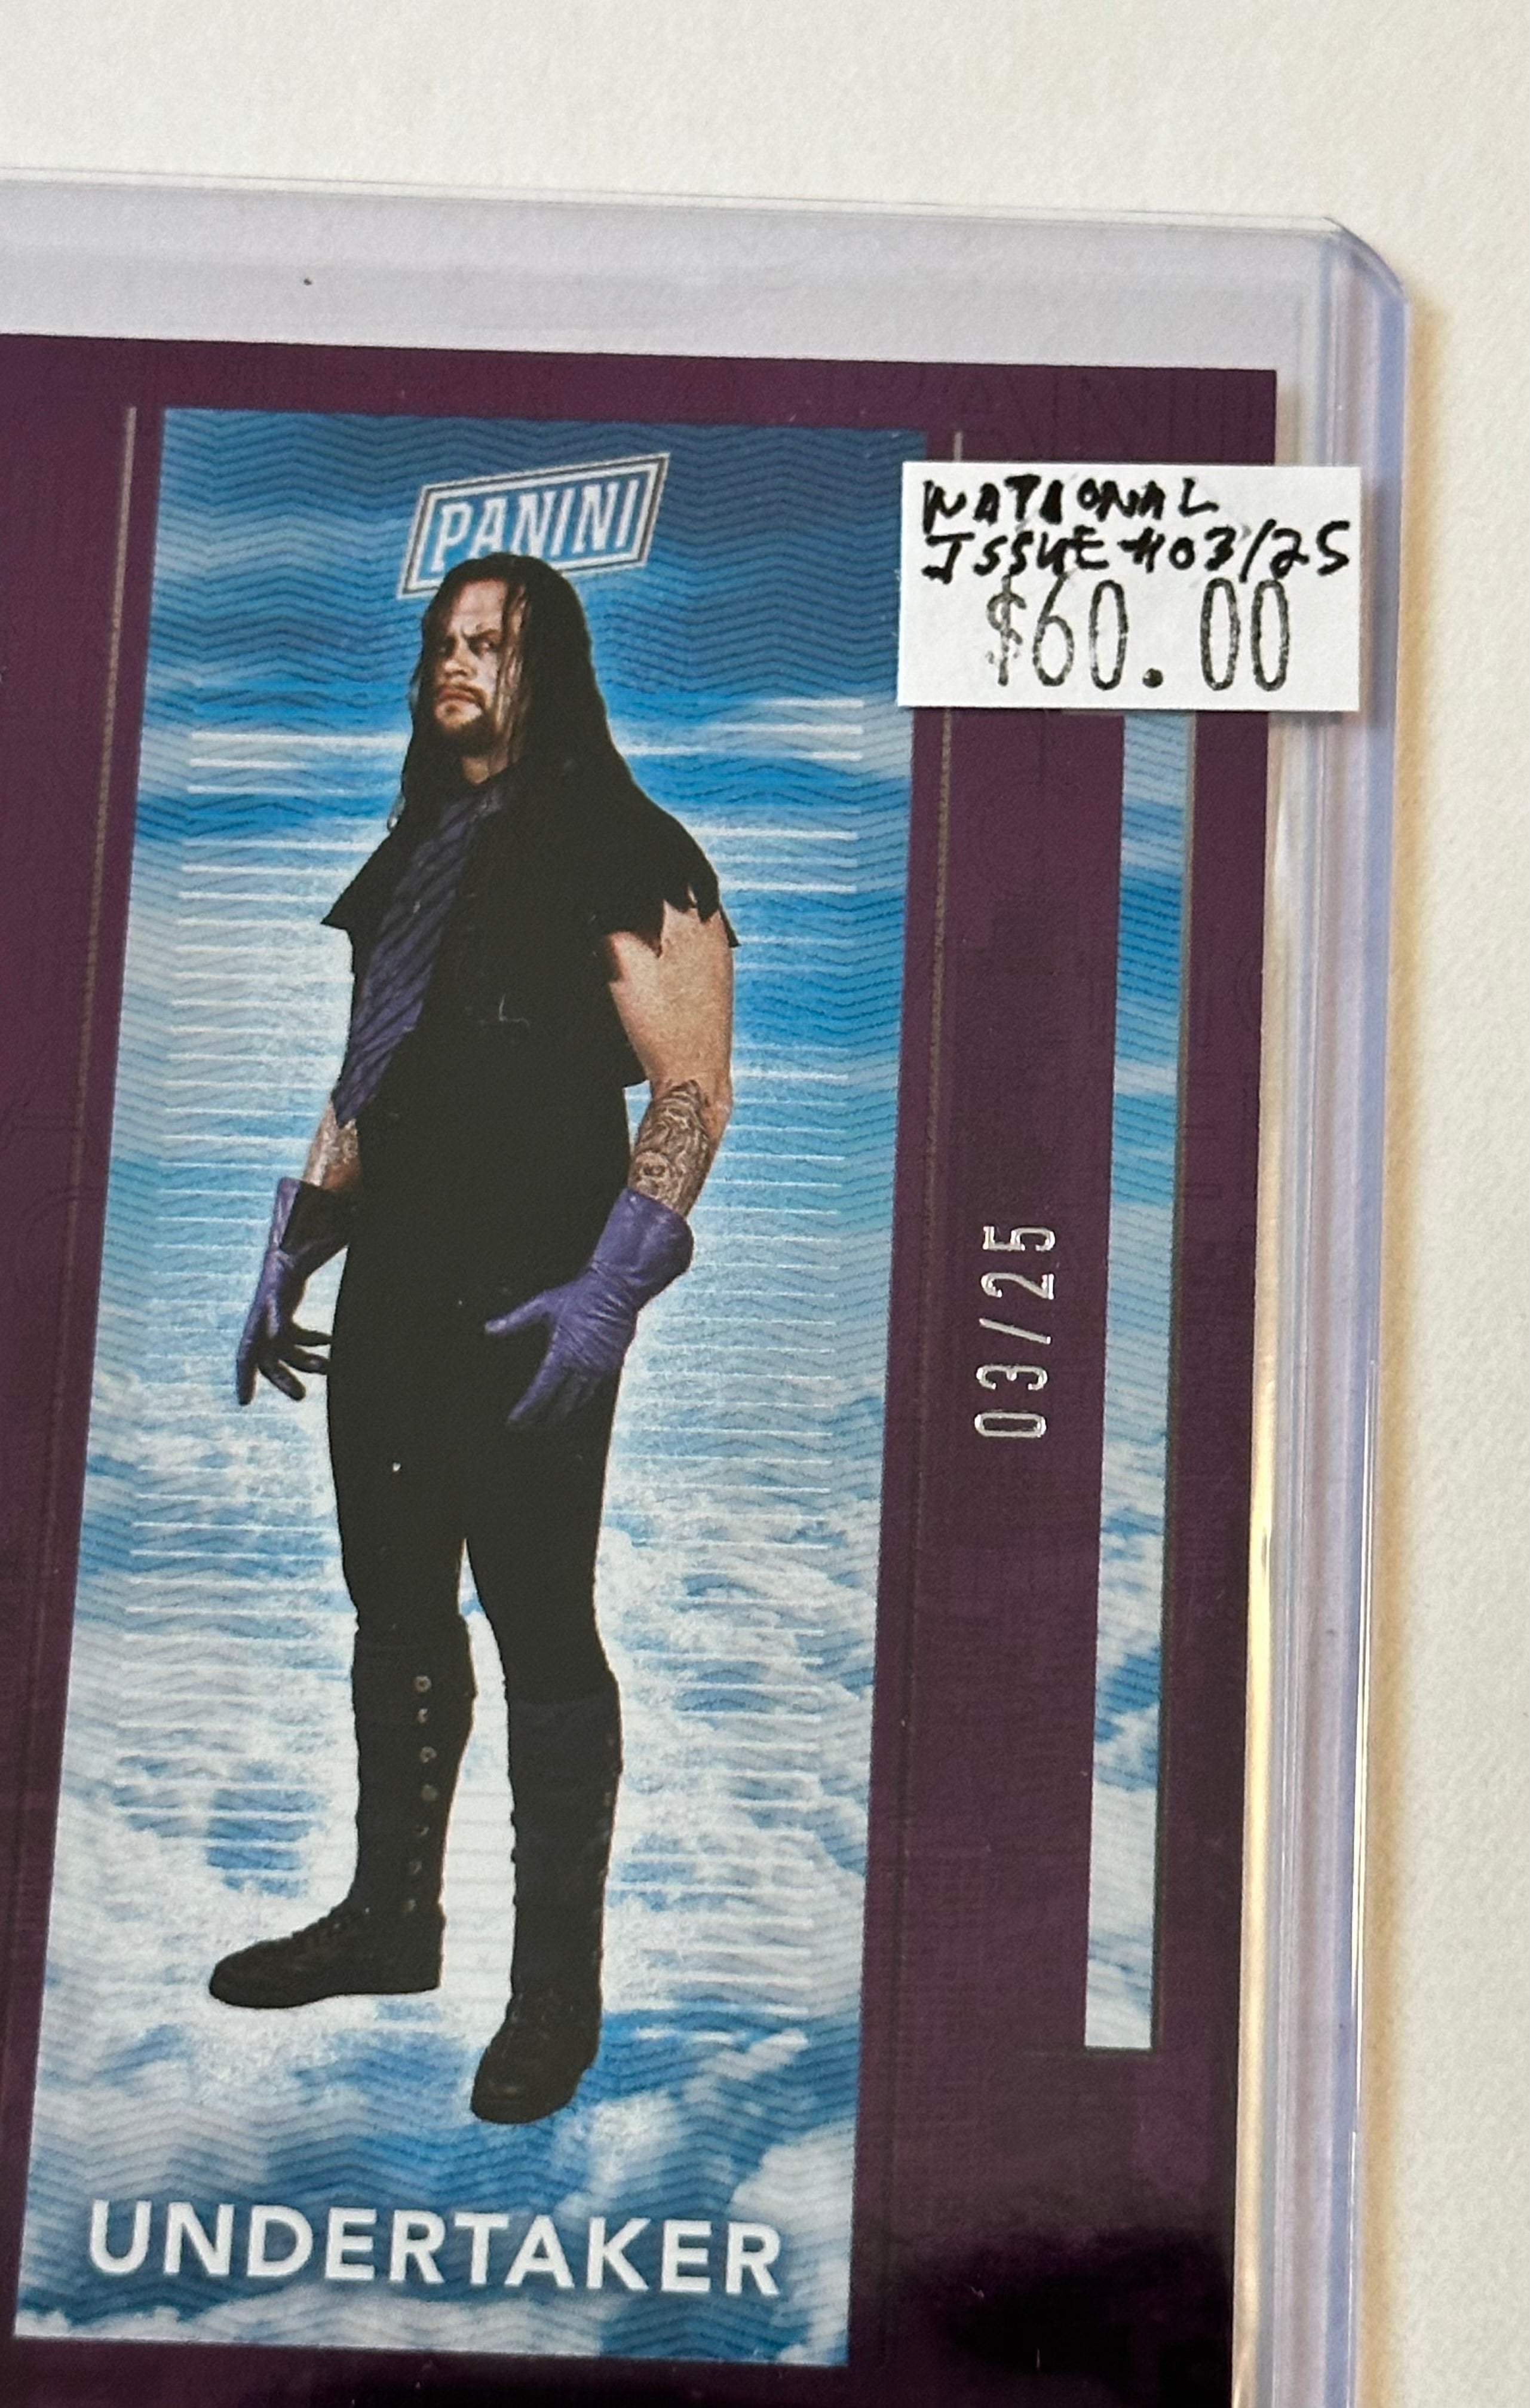 Wrestling The Undertaker rare numbered #03/25 foil insert card from the National sportscard expo 2023.